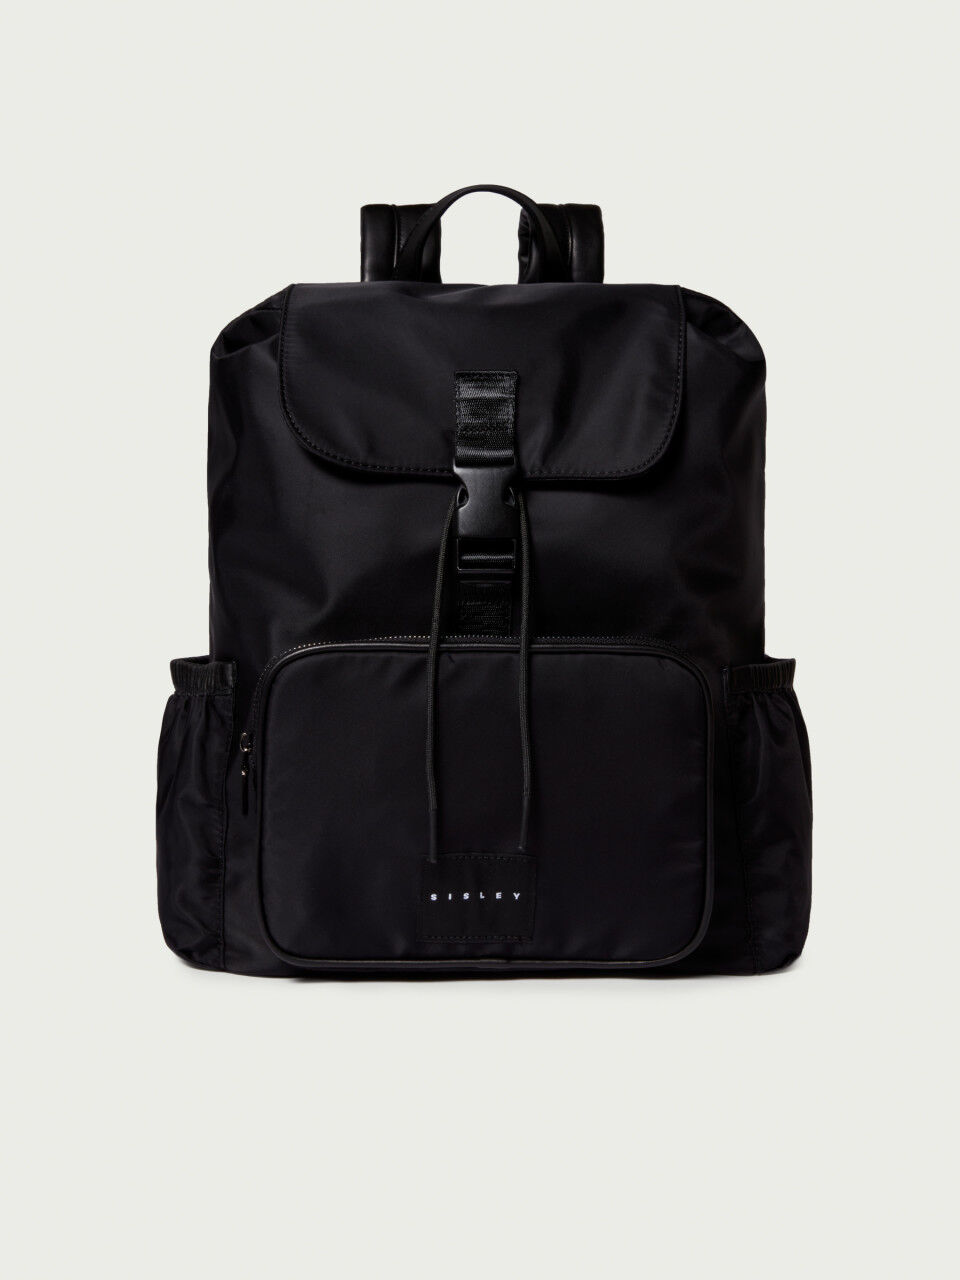 Men's Bags Backpacks New Collection 2021 | Sisley